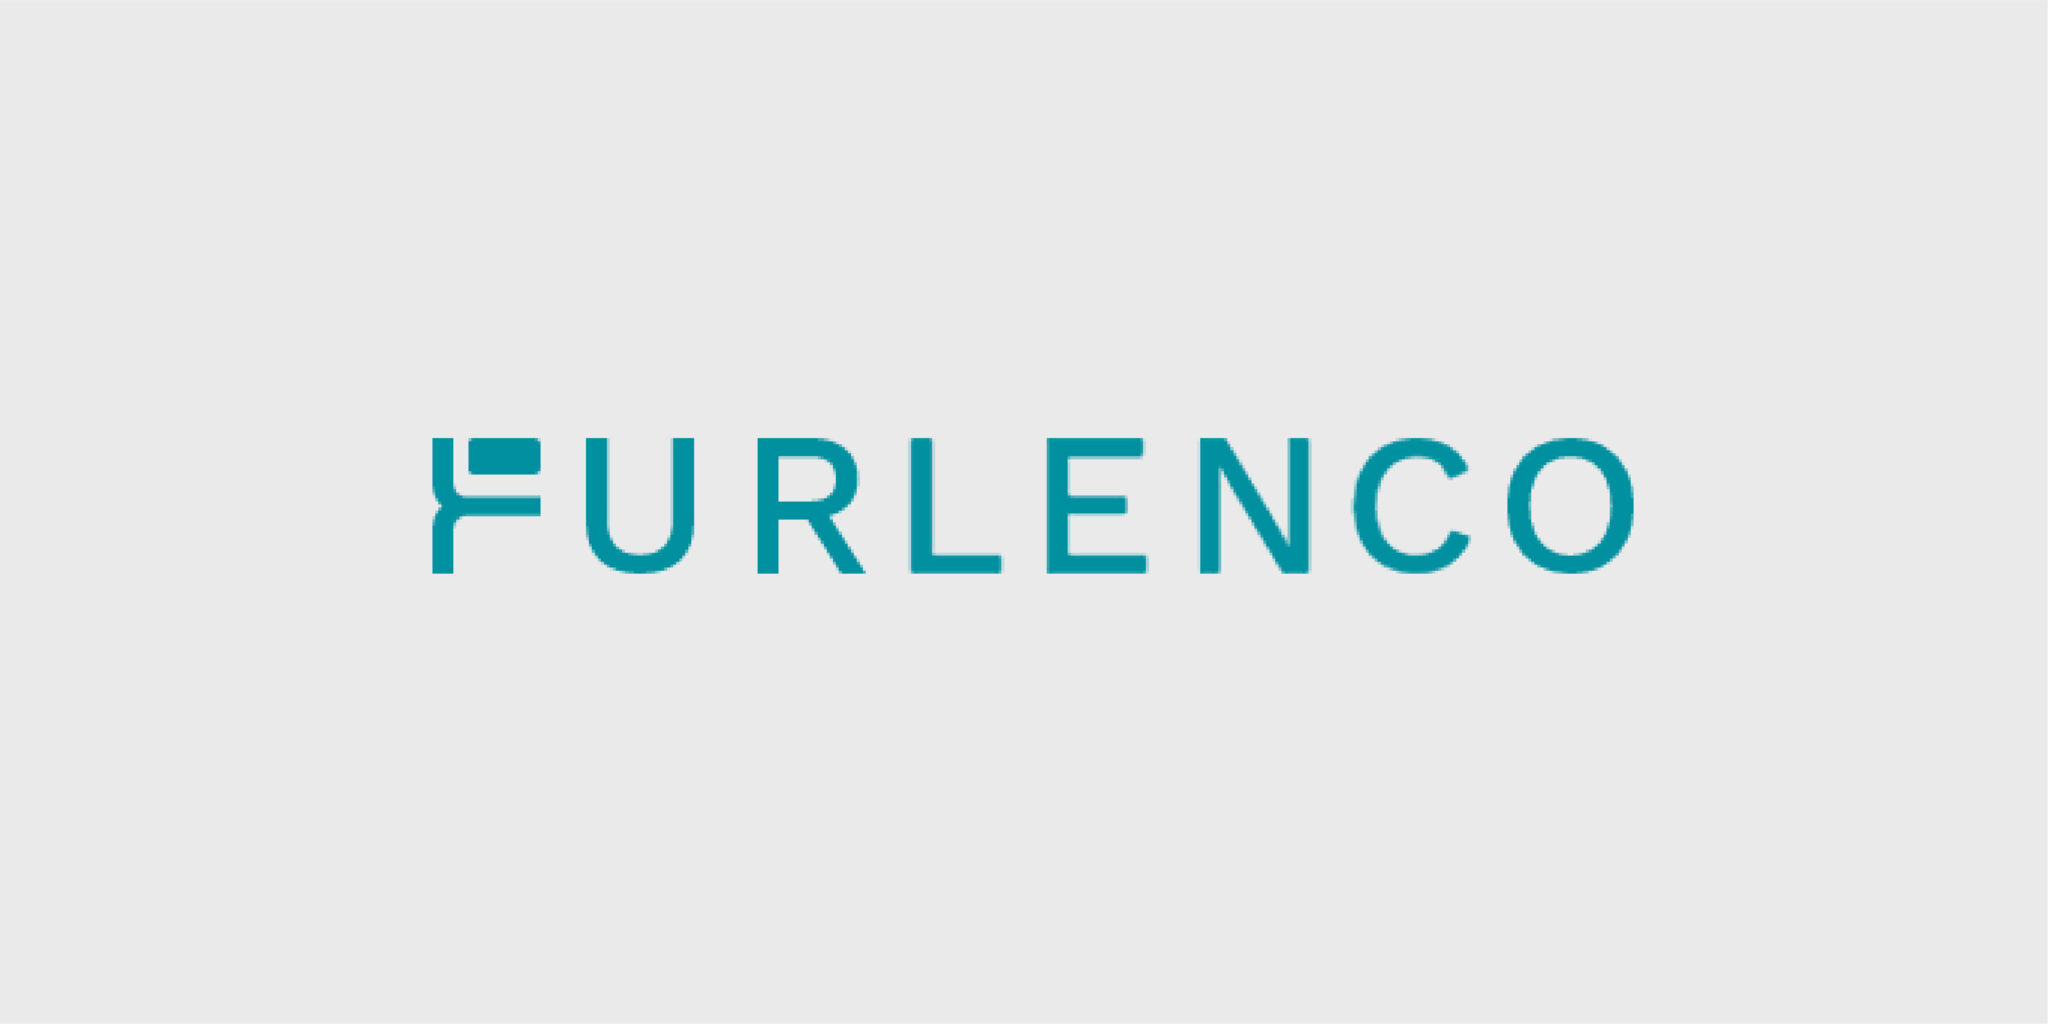 India's Furlenco to sell 35% stake for $36.5 million | TechCrunch